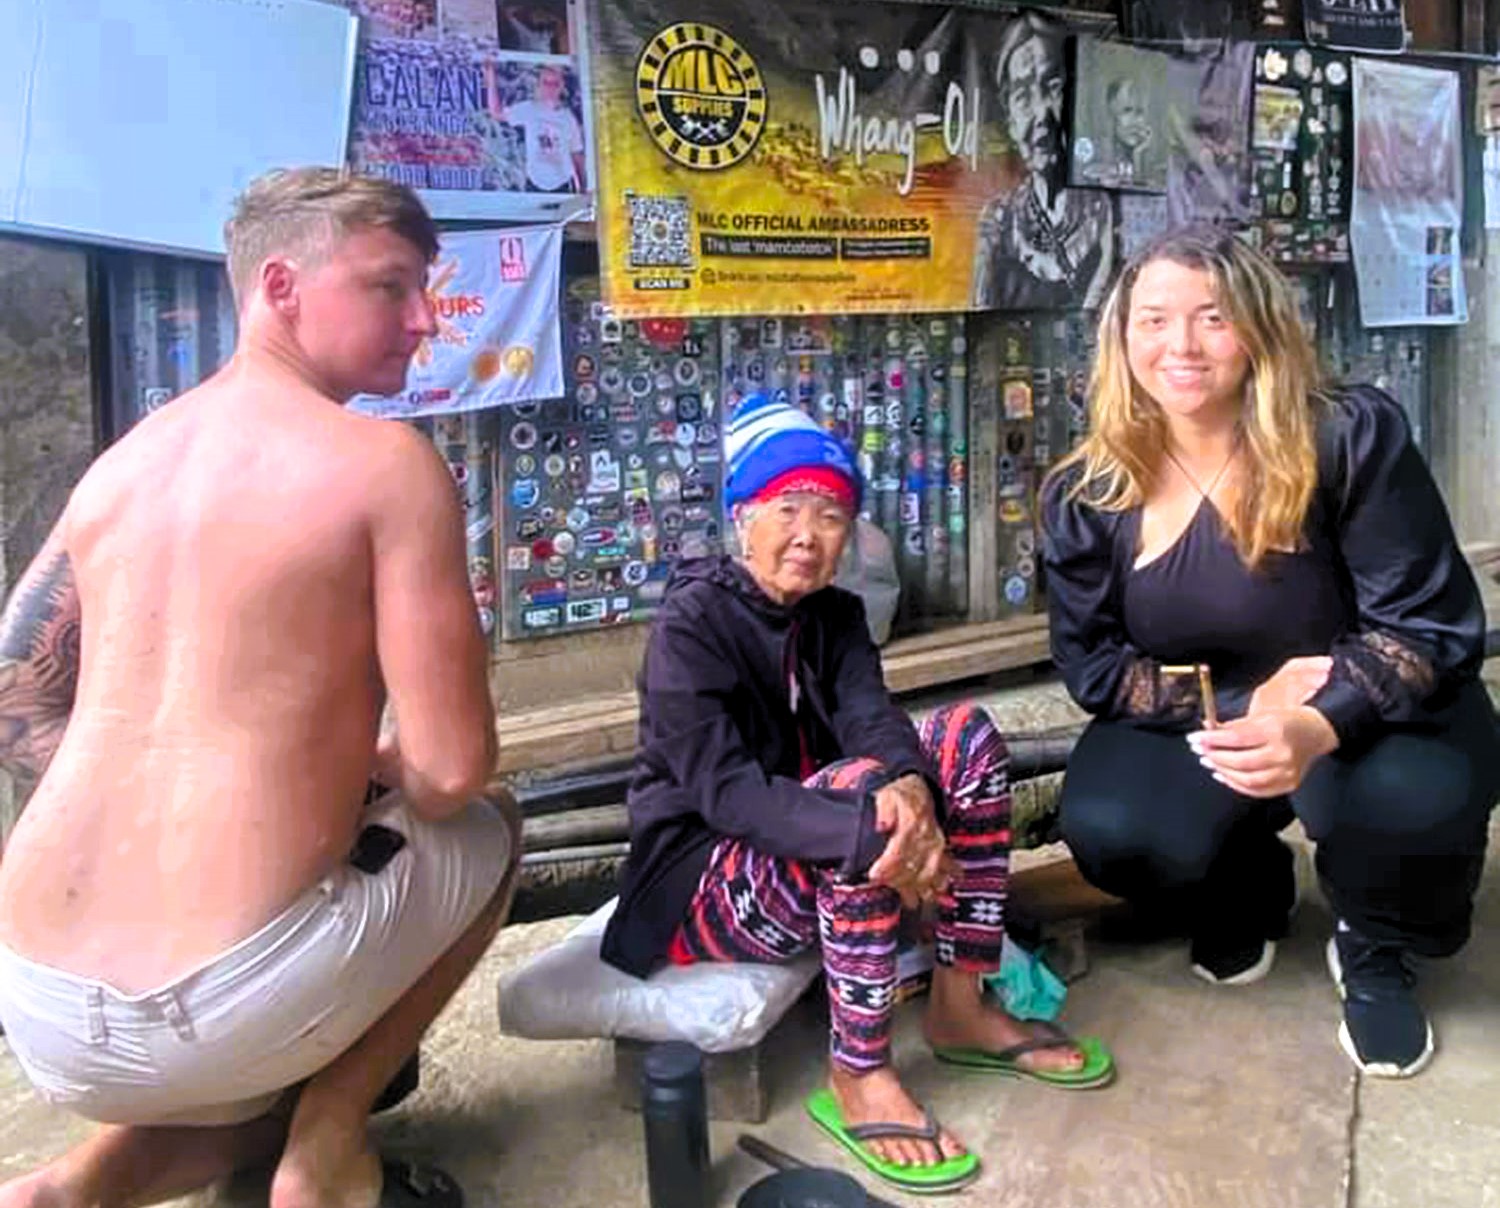 A couple travels nine hours to get tattooed by the world's oldest tattooist, Whang-Od, in Buscalan, Philippines. She's 107 and has been hand-tapping tattoos for over nine decades.